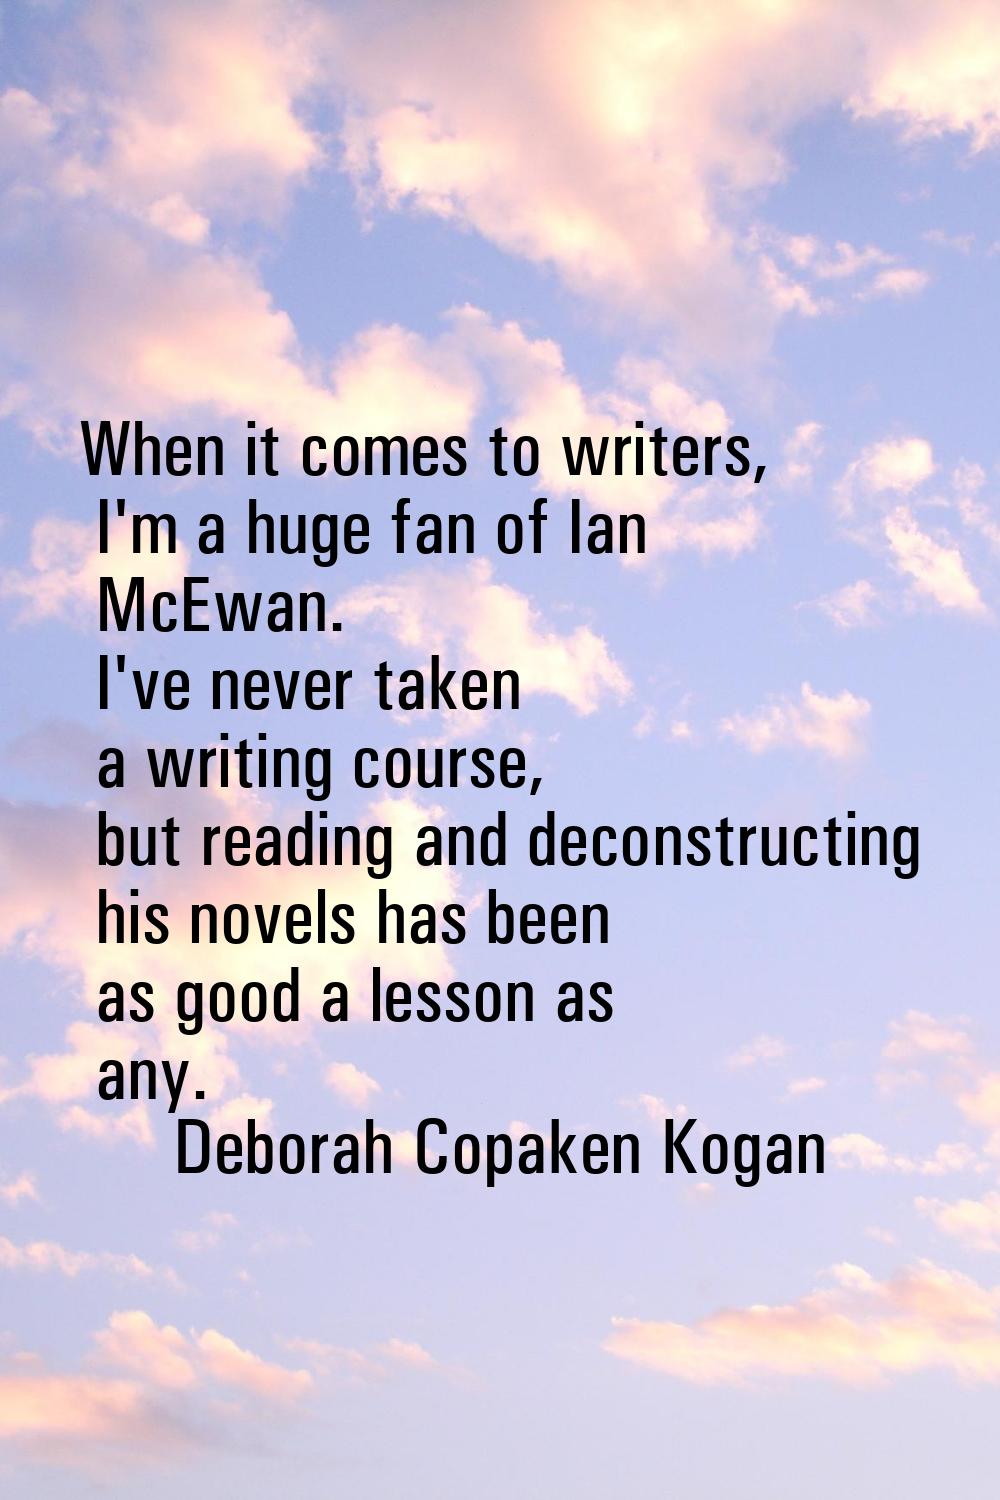 When it comes to writers, I'm a huge fan of Ian McEwan. I've never taken a writing course, but read